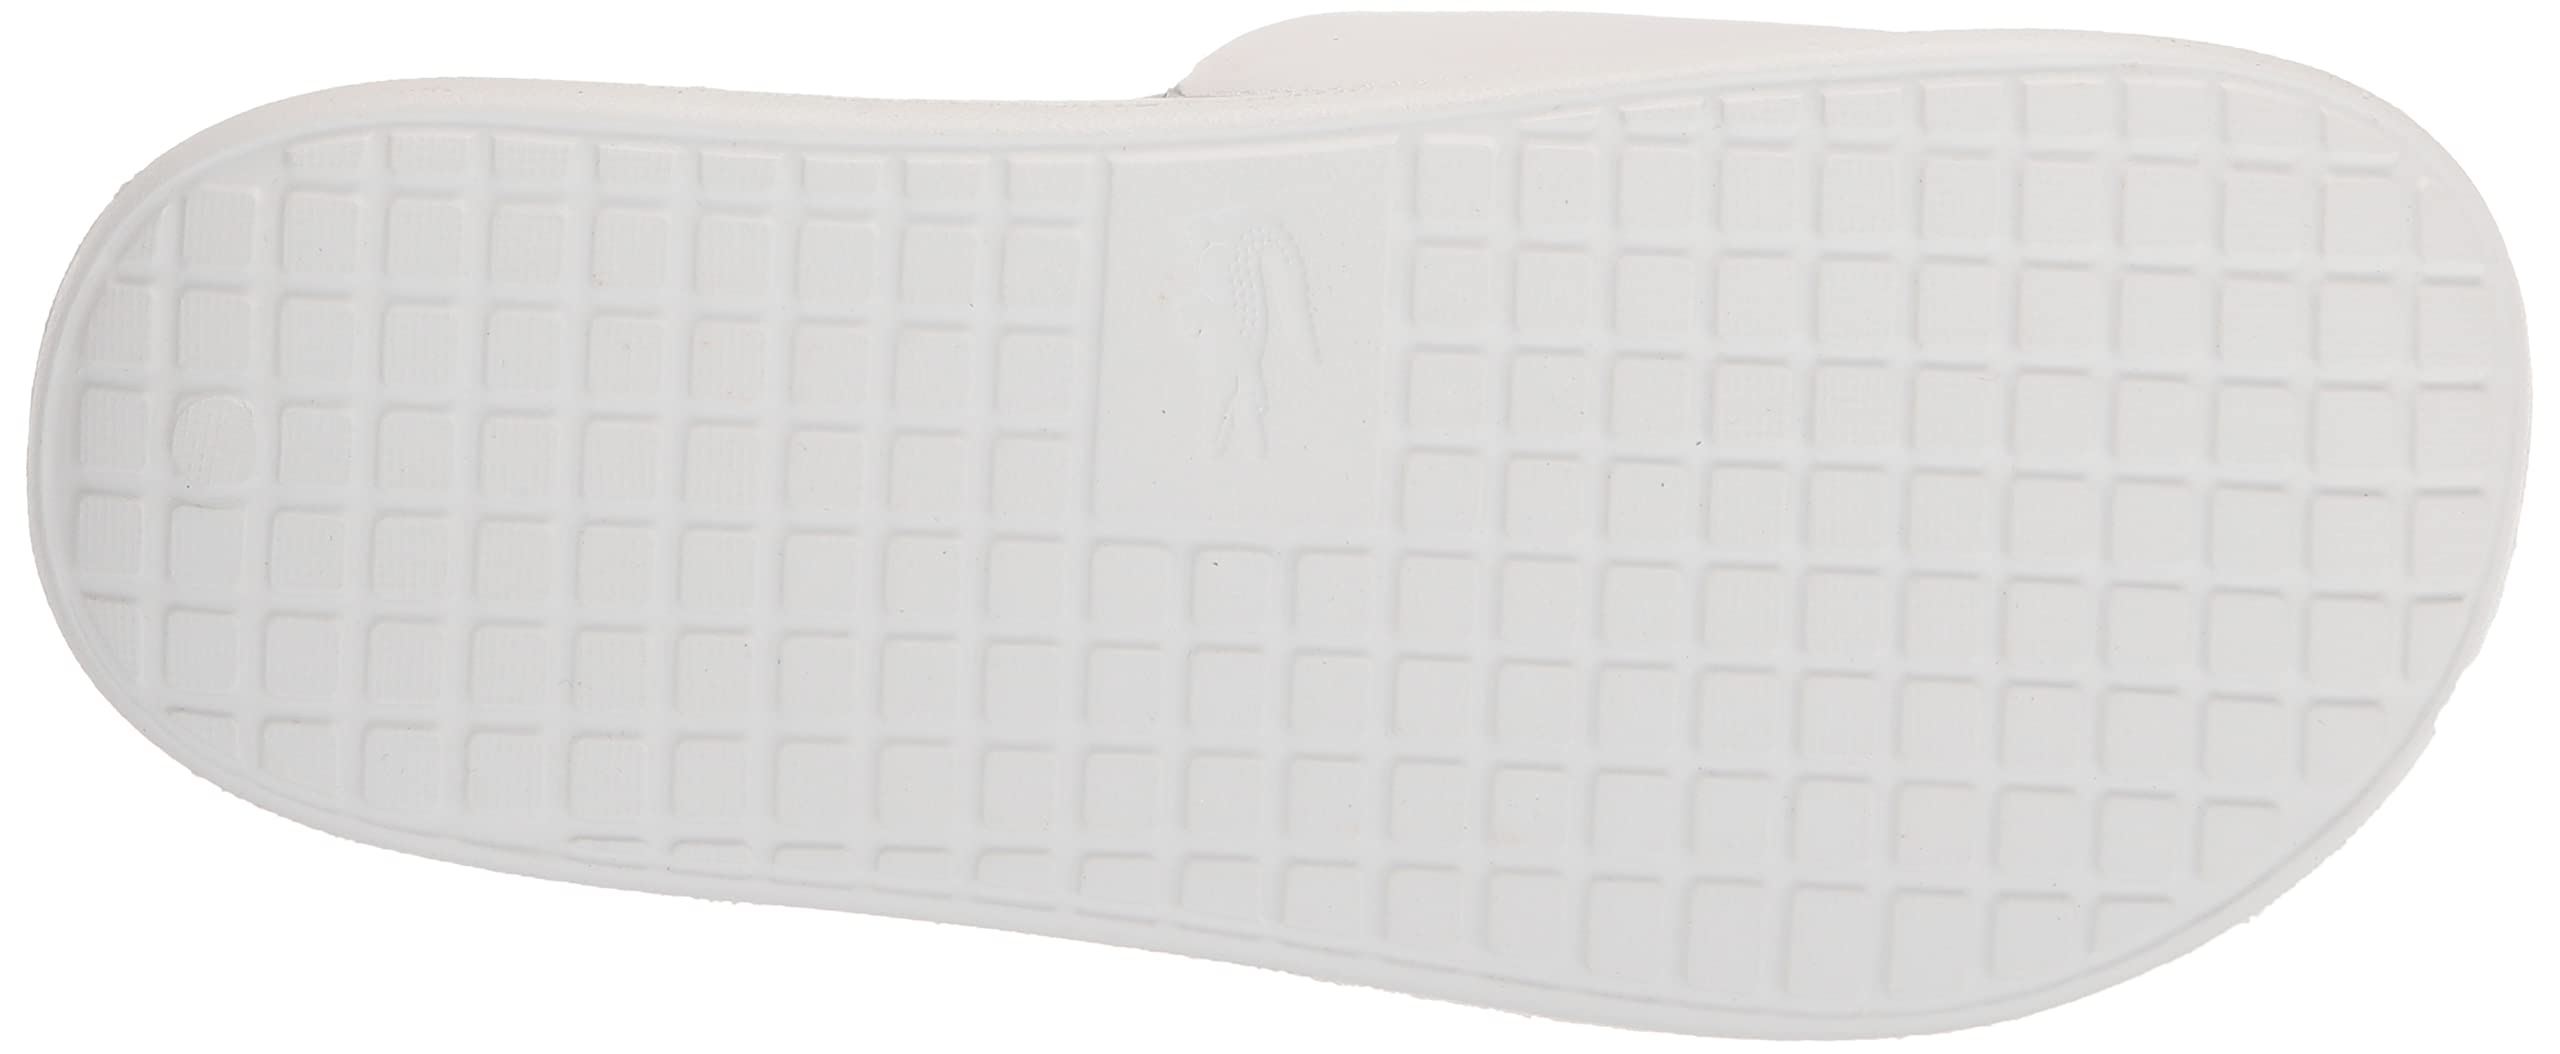 Lacoste Womens Fraisier and Croco Slides